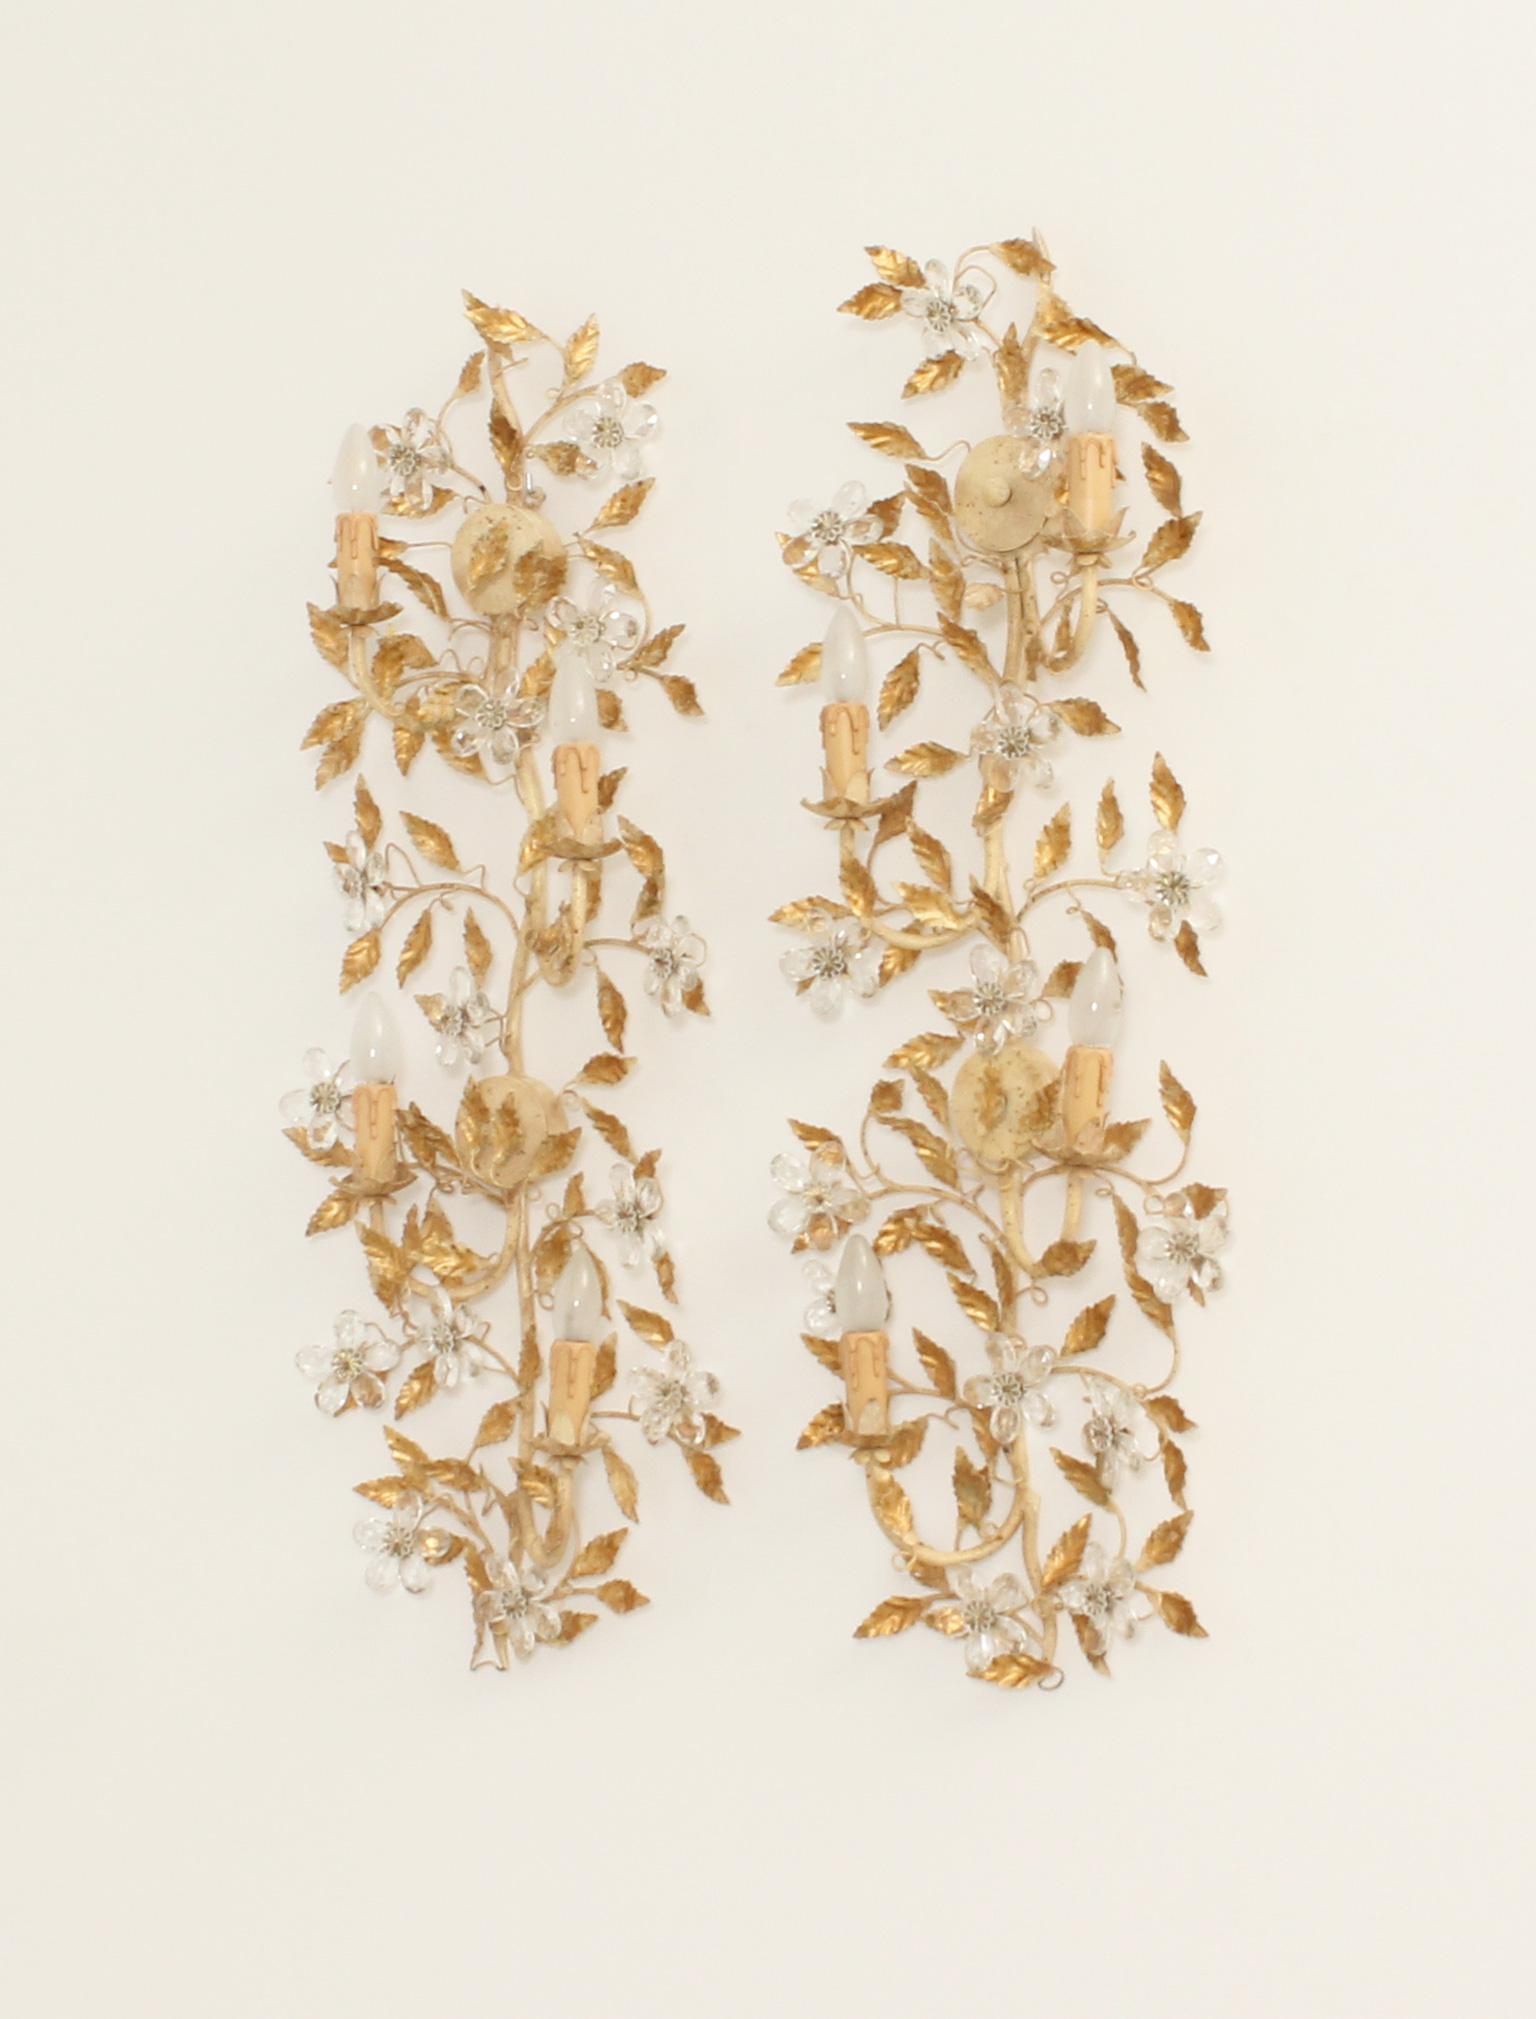 Spanish Pair of Large Floral Sconces in Gilt Metal from 1960s, Spain For Sale